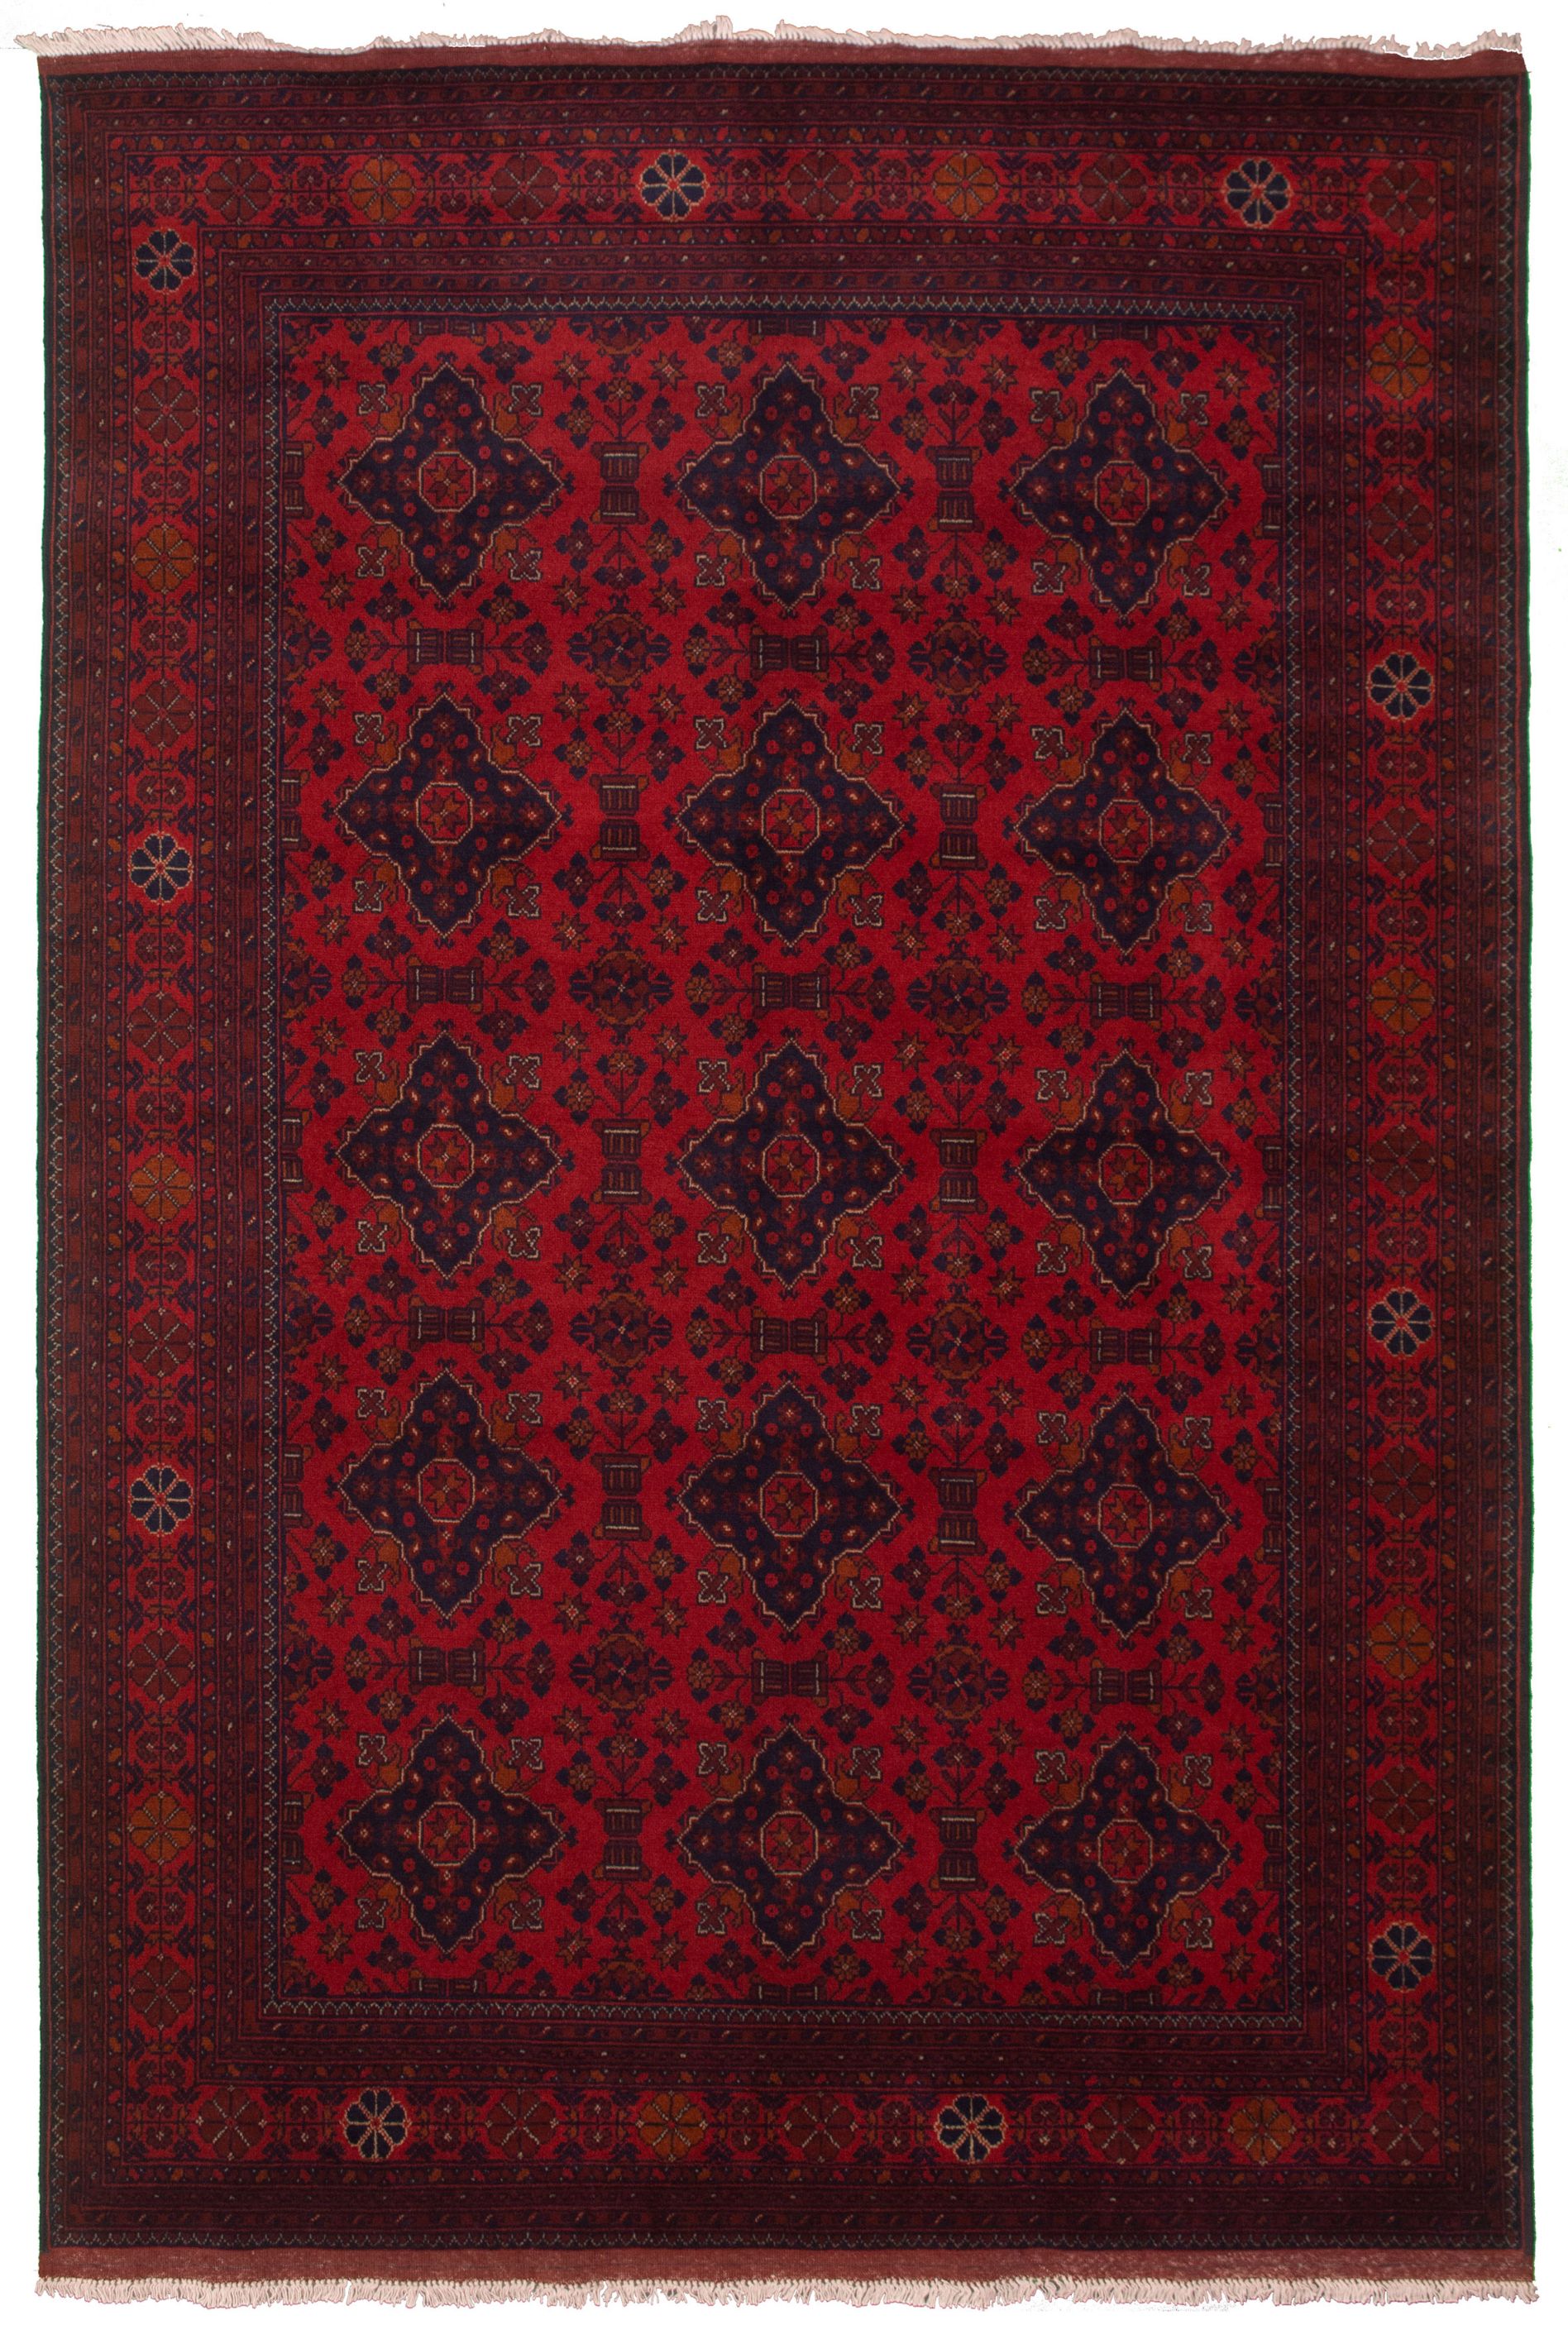 Hand-knotted Finest Khal Mohammadi Red Wool Rug 6'6" x 9'11"  Size: 6'6" x 9'11"  